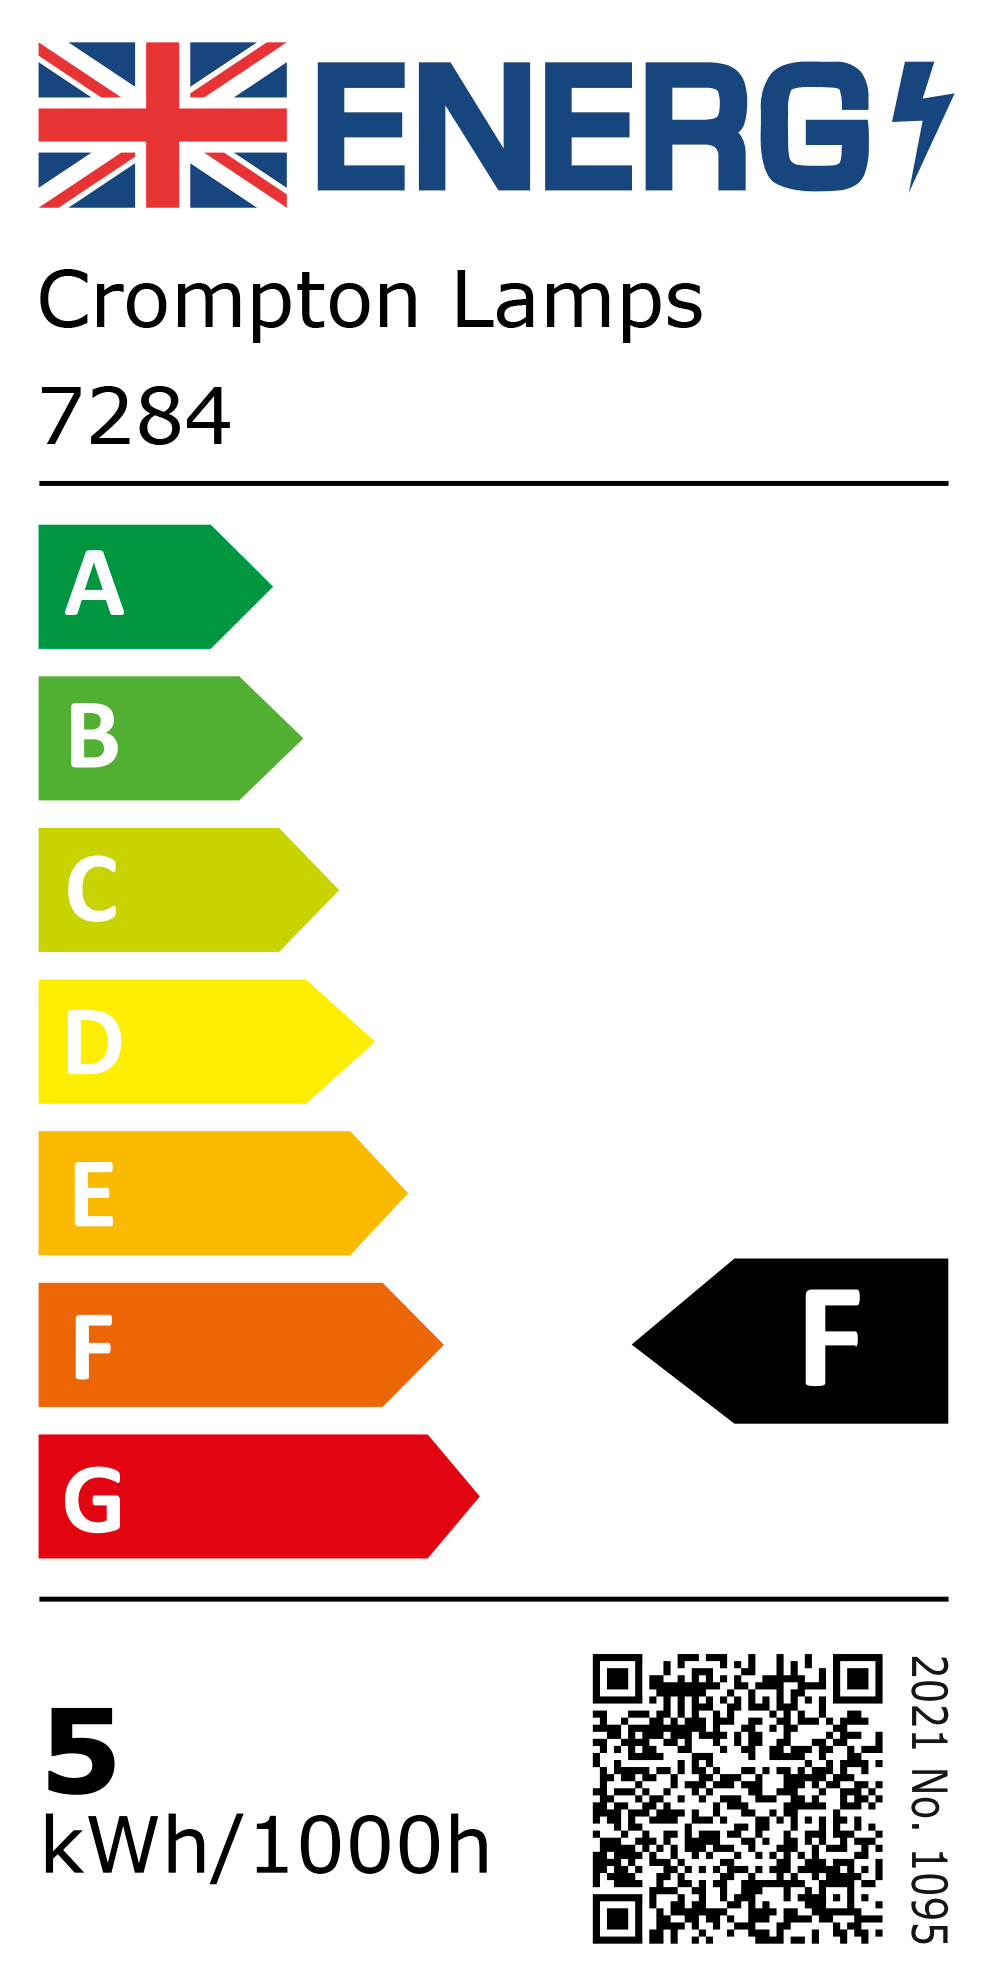 New 2021 Energy Rating Label: Stock Code 7284